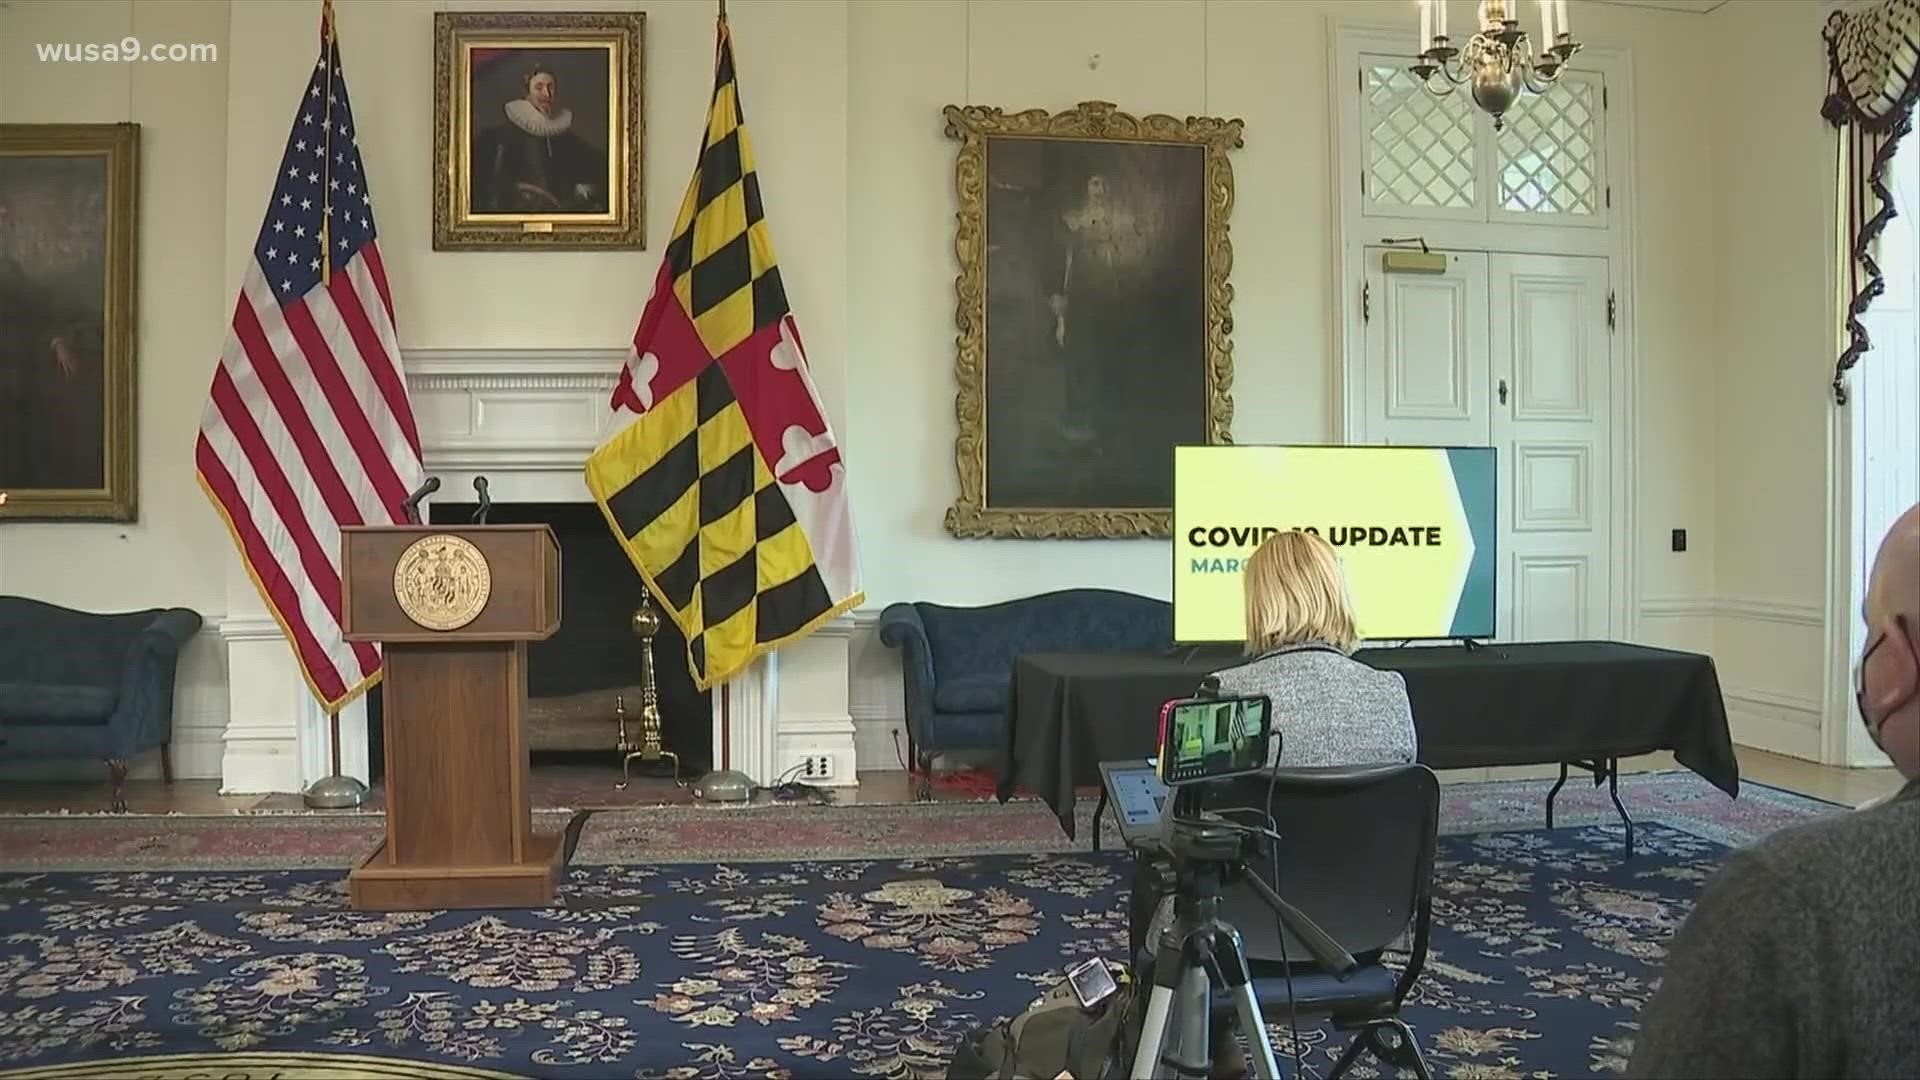 Gov. Larry Hogan and Maryland officials are providing the latest updates on COVID-19 and the state's response to the COVID-19 pandemic.